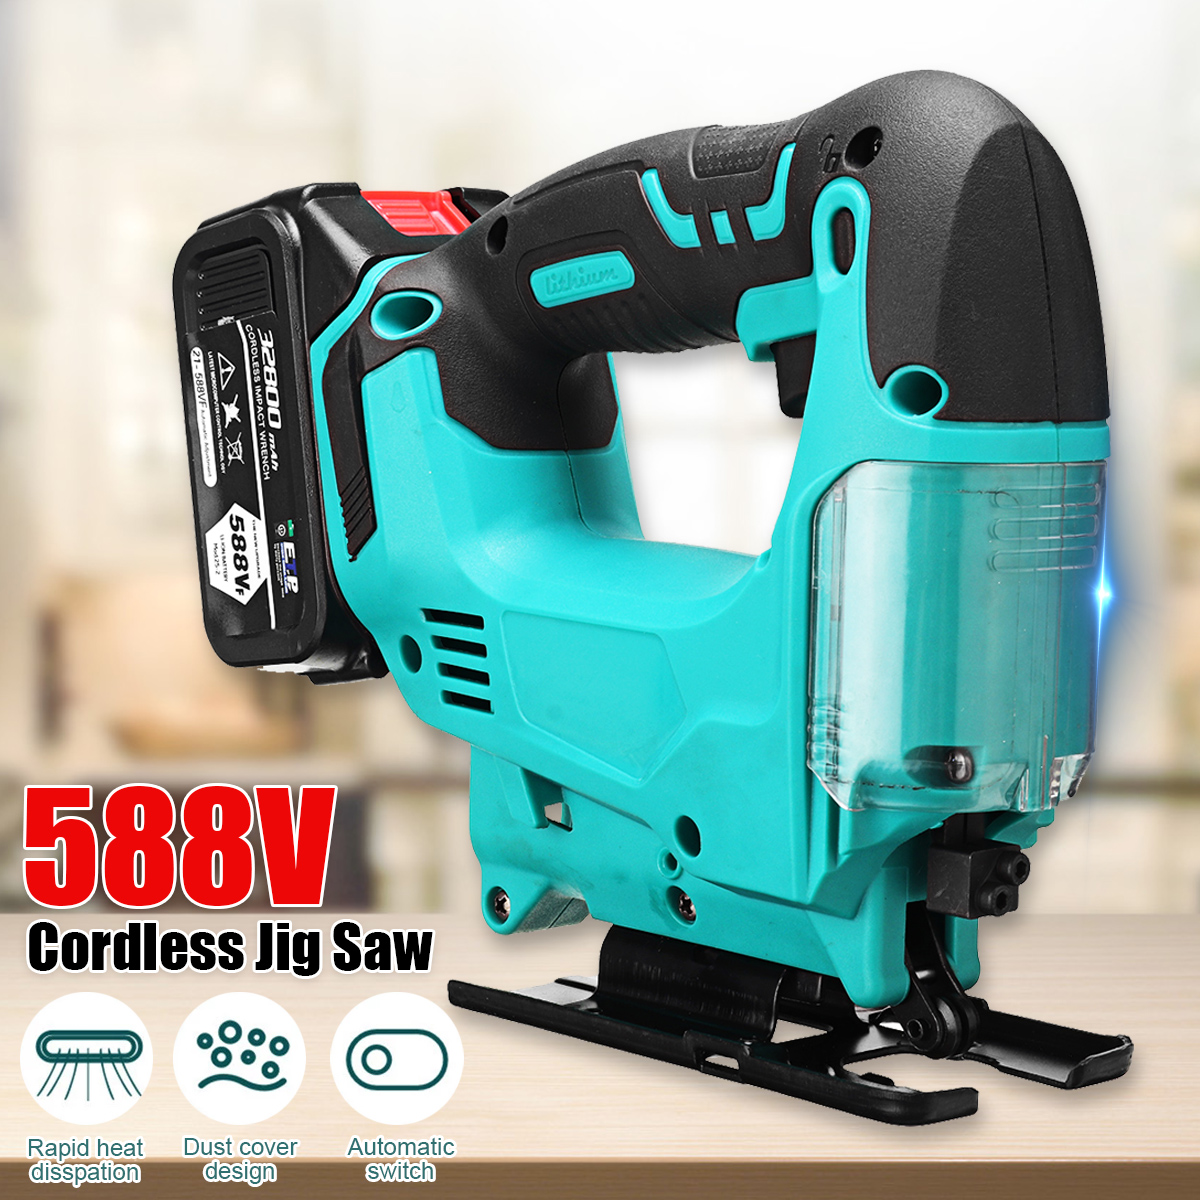 588VF-Electric-Jigsaw-Cordless-Portable-Woodworking-Cutting-Jig-Saw-Power-Tools-W-None12-Battery-1883229-1